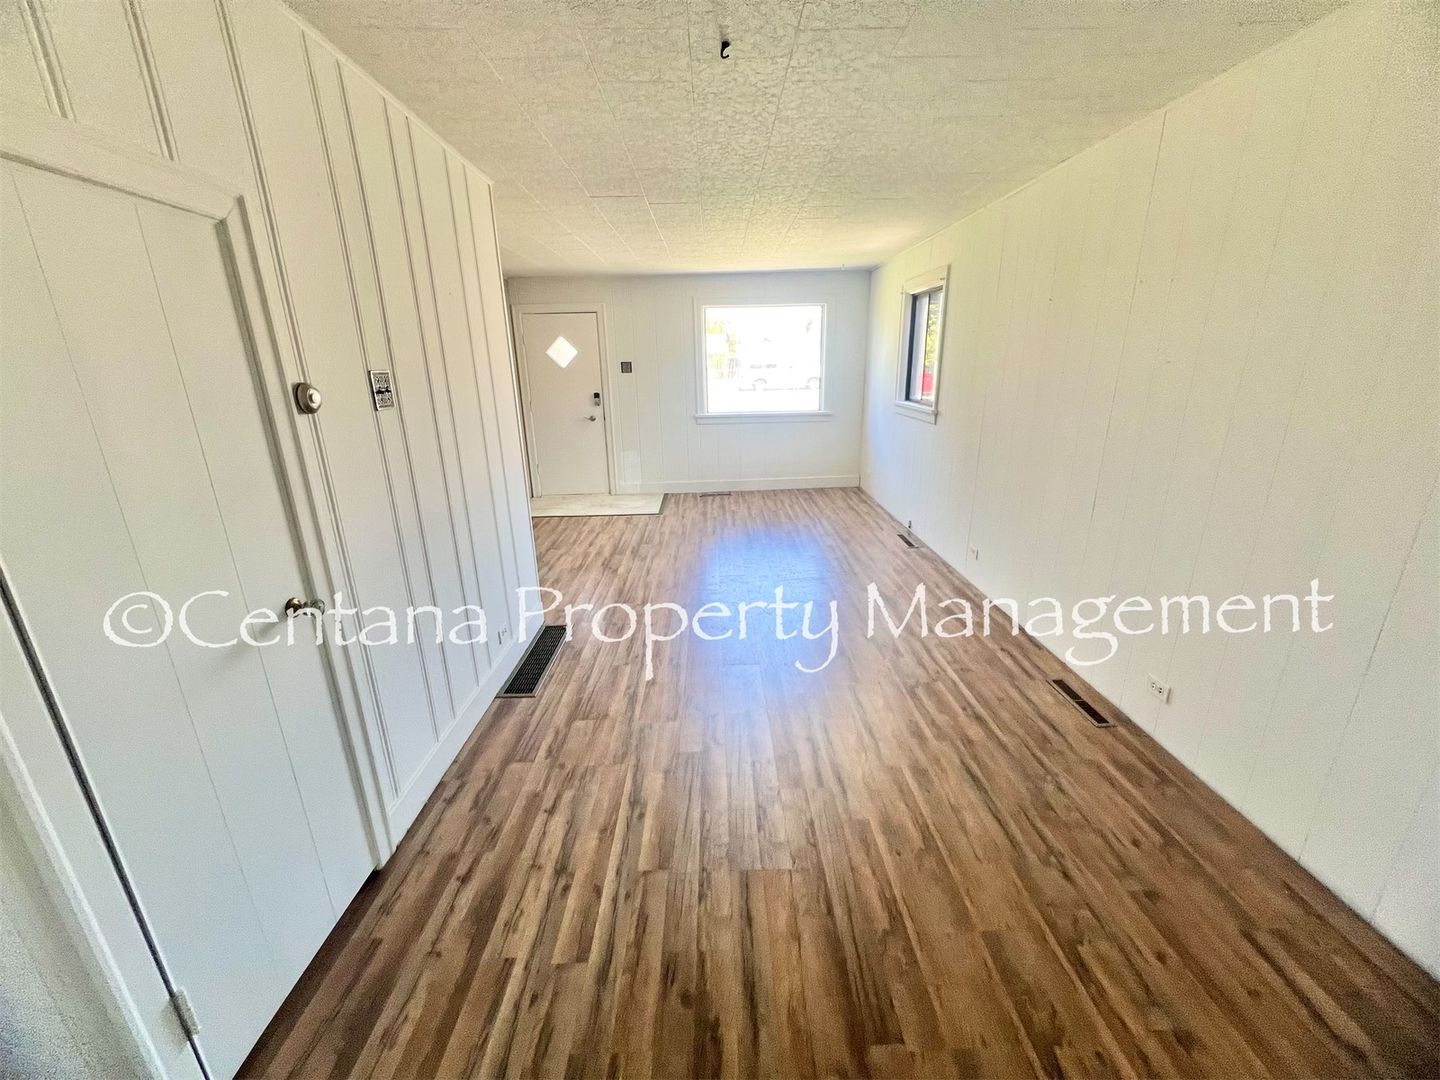 Remodeled 2 bedroom house on the flats with a garage, fenced yard, storage, and so much more!